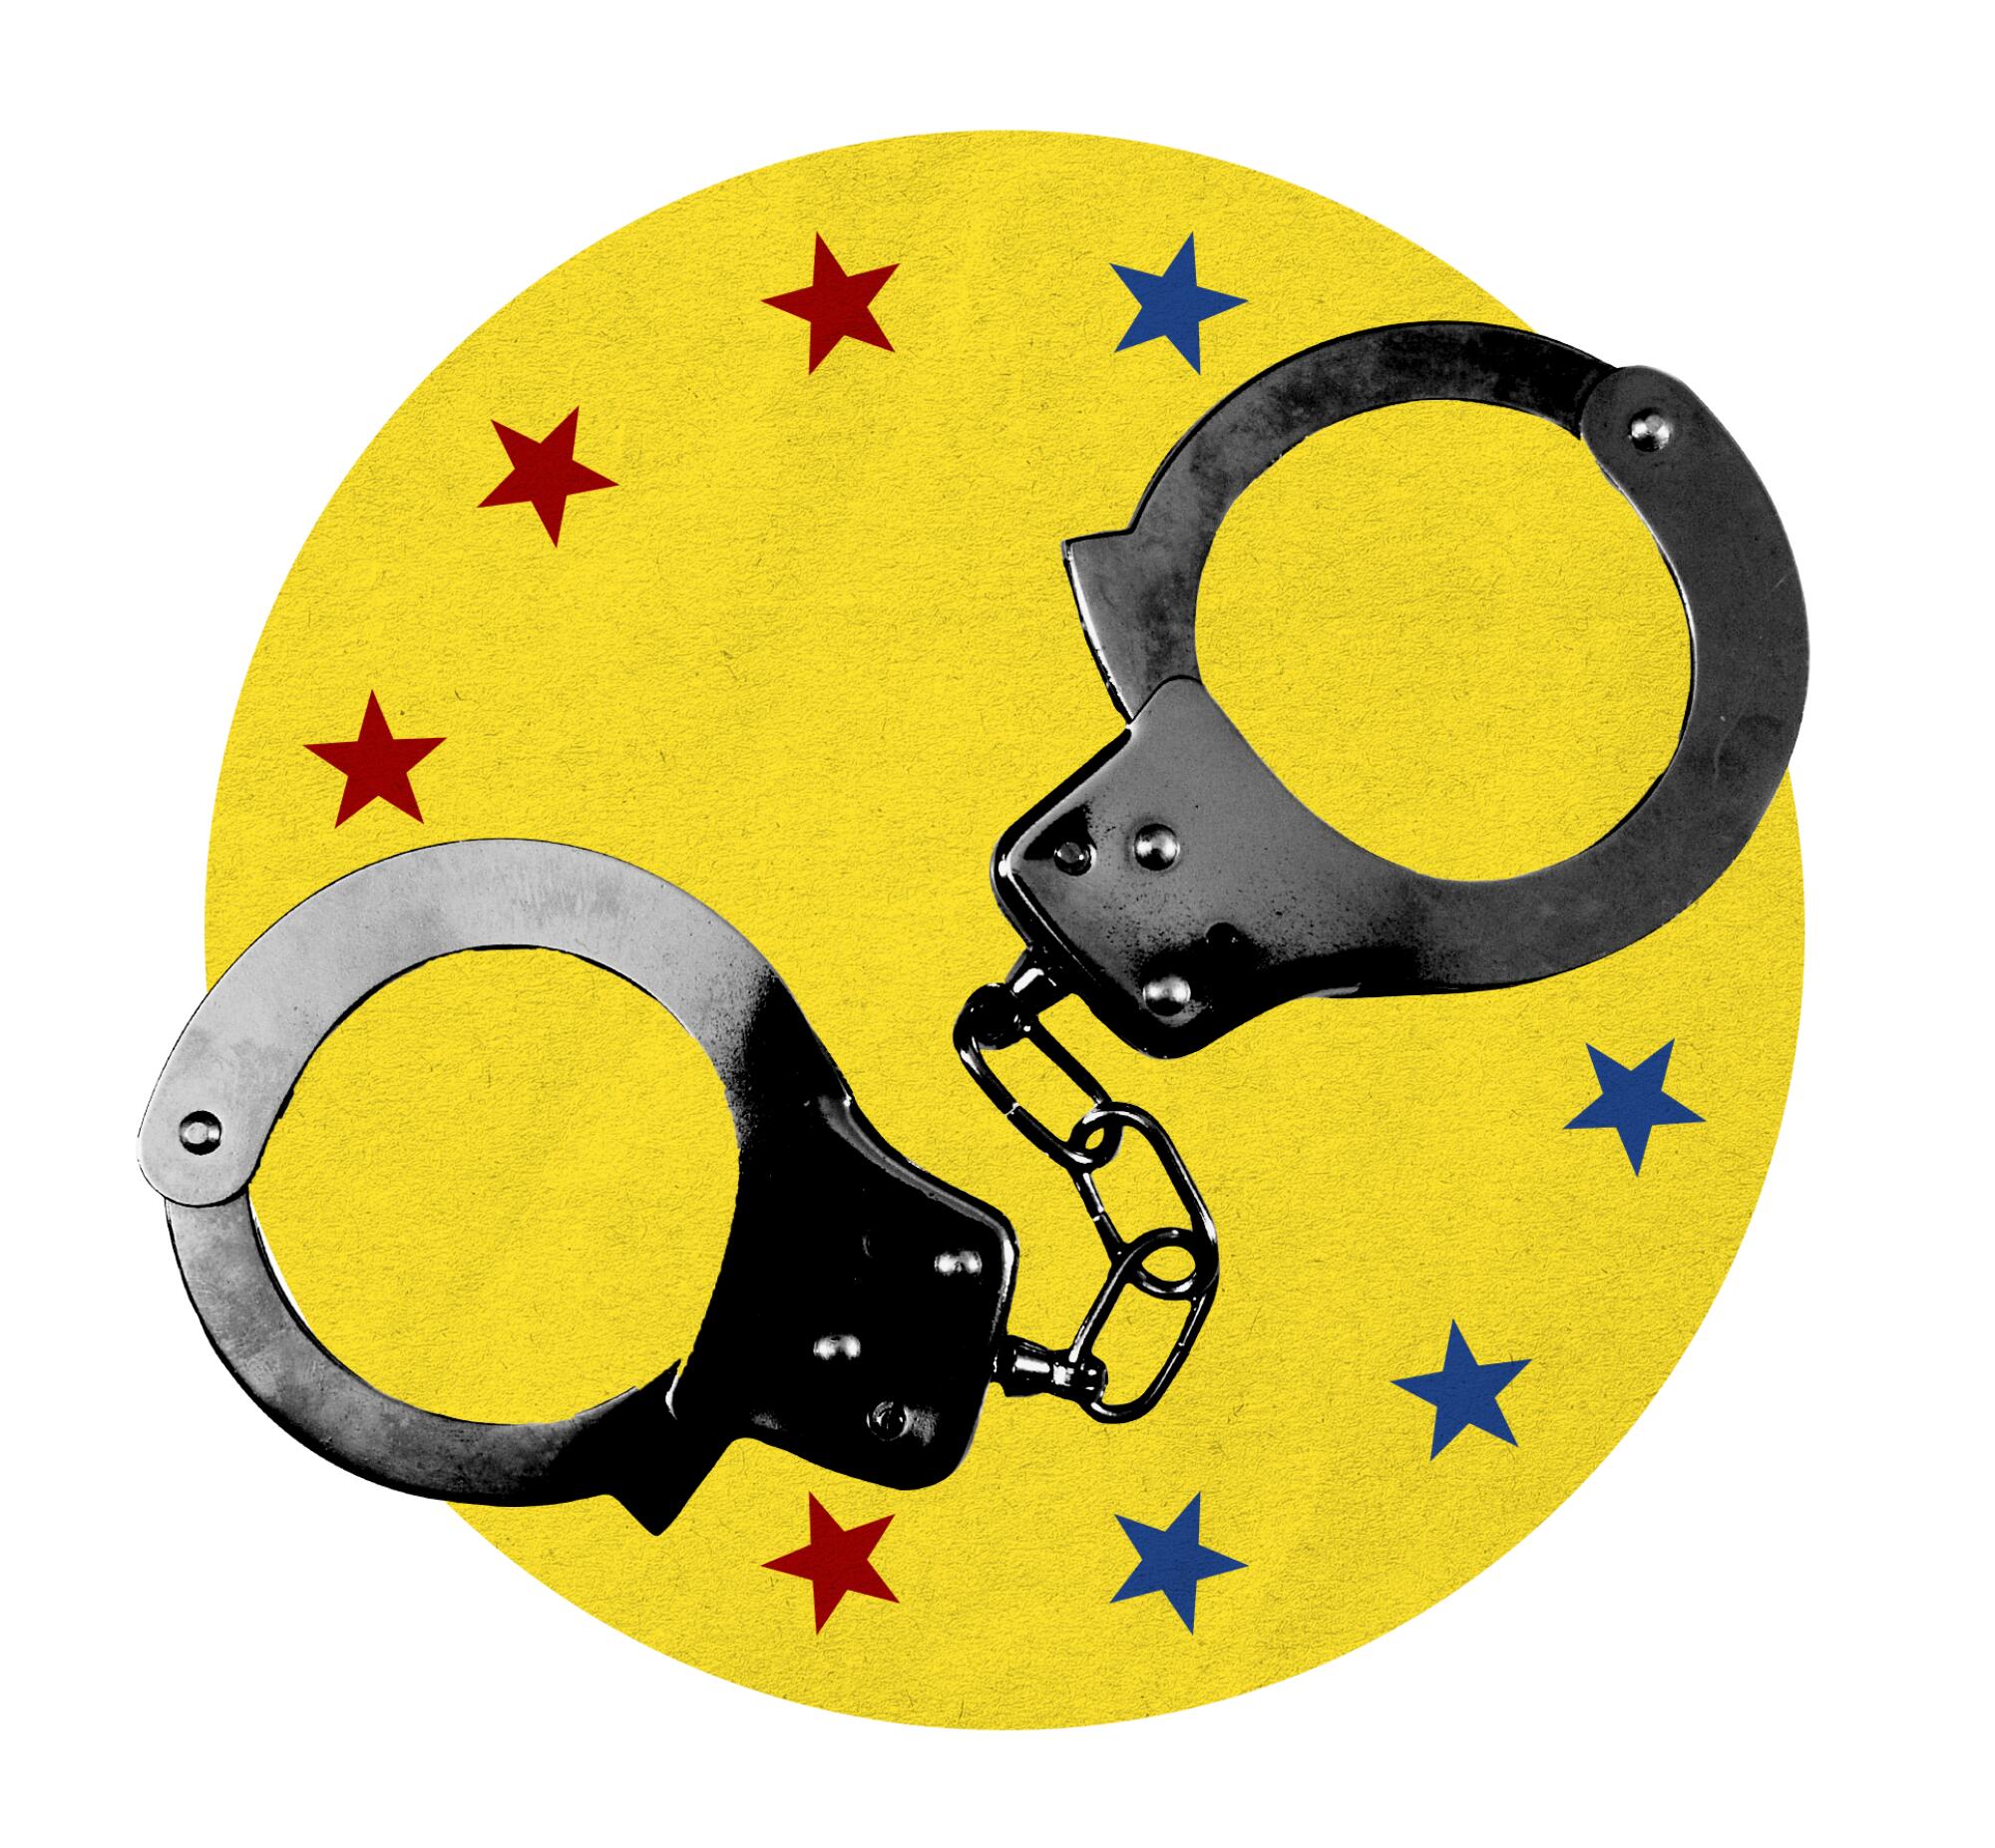 photo of handcuffs in yellow circle with stars